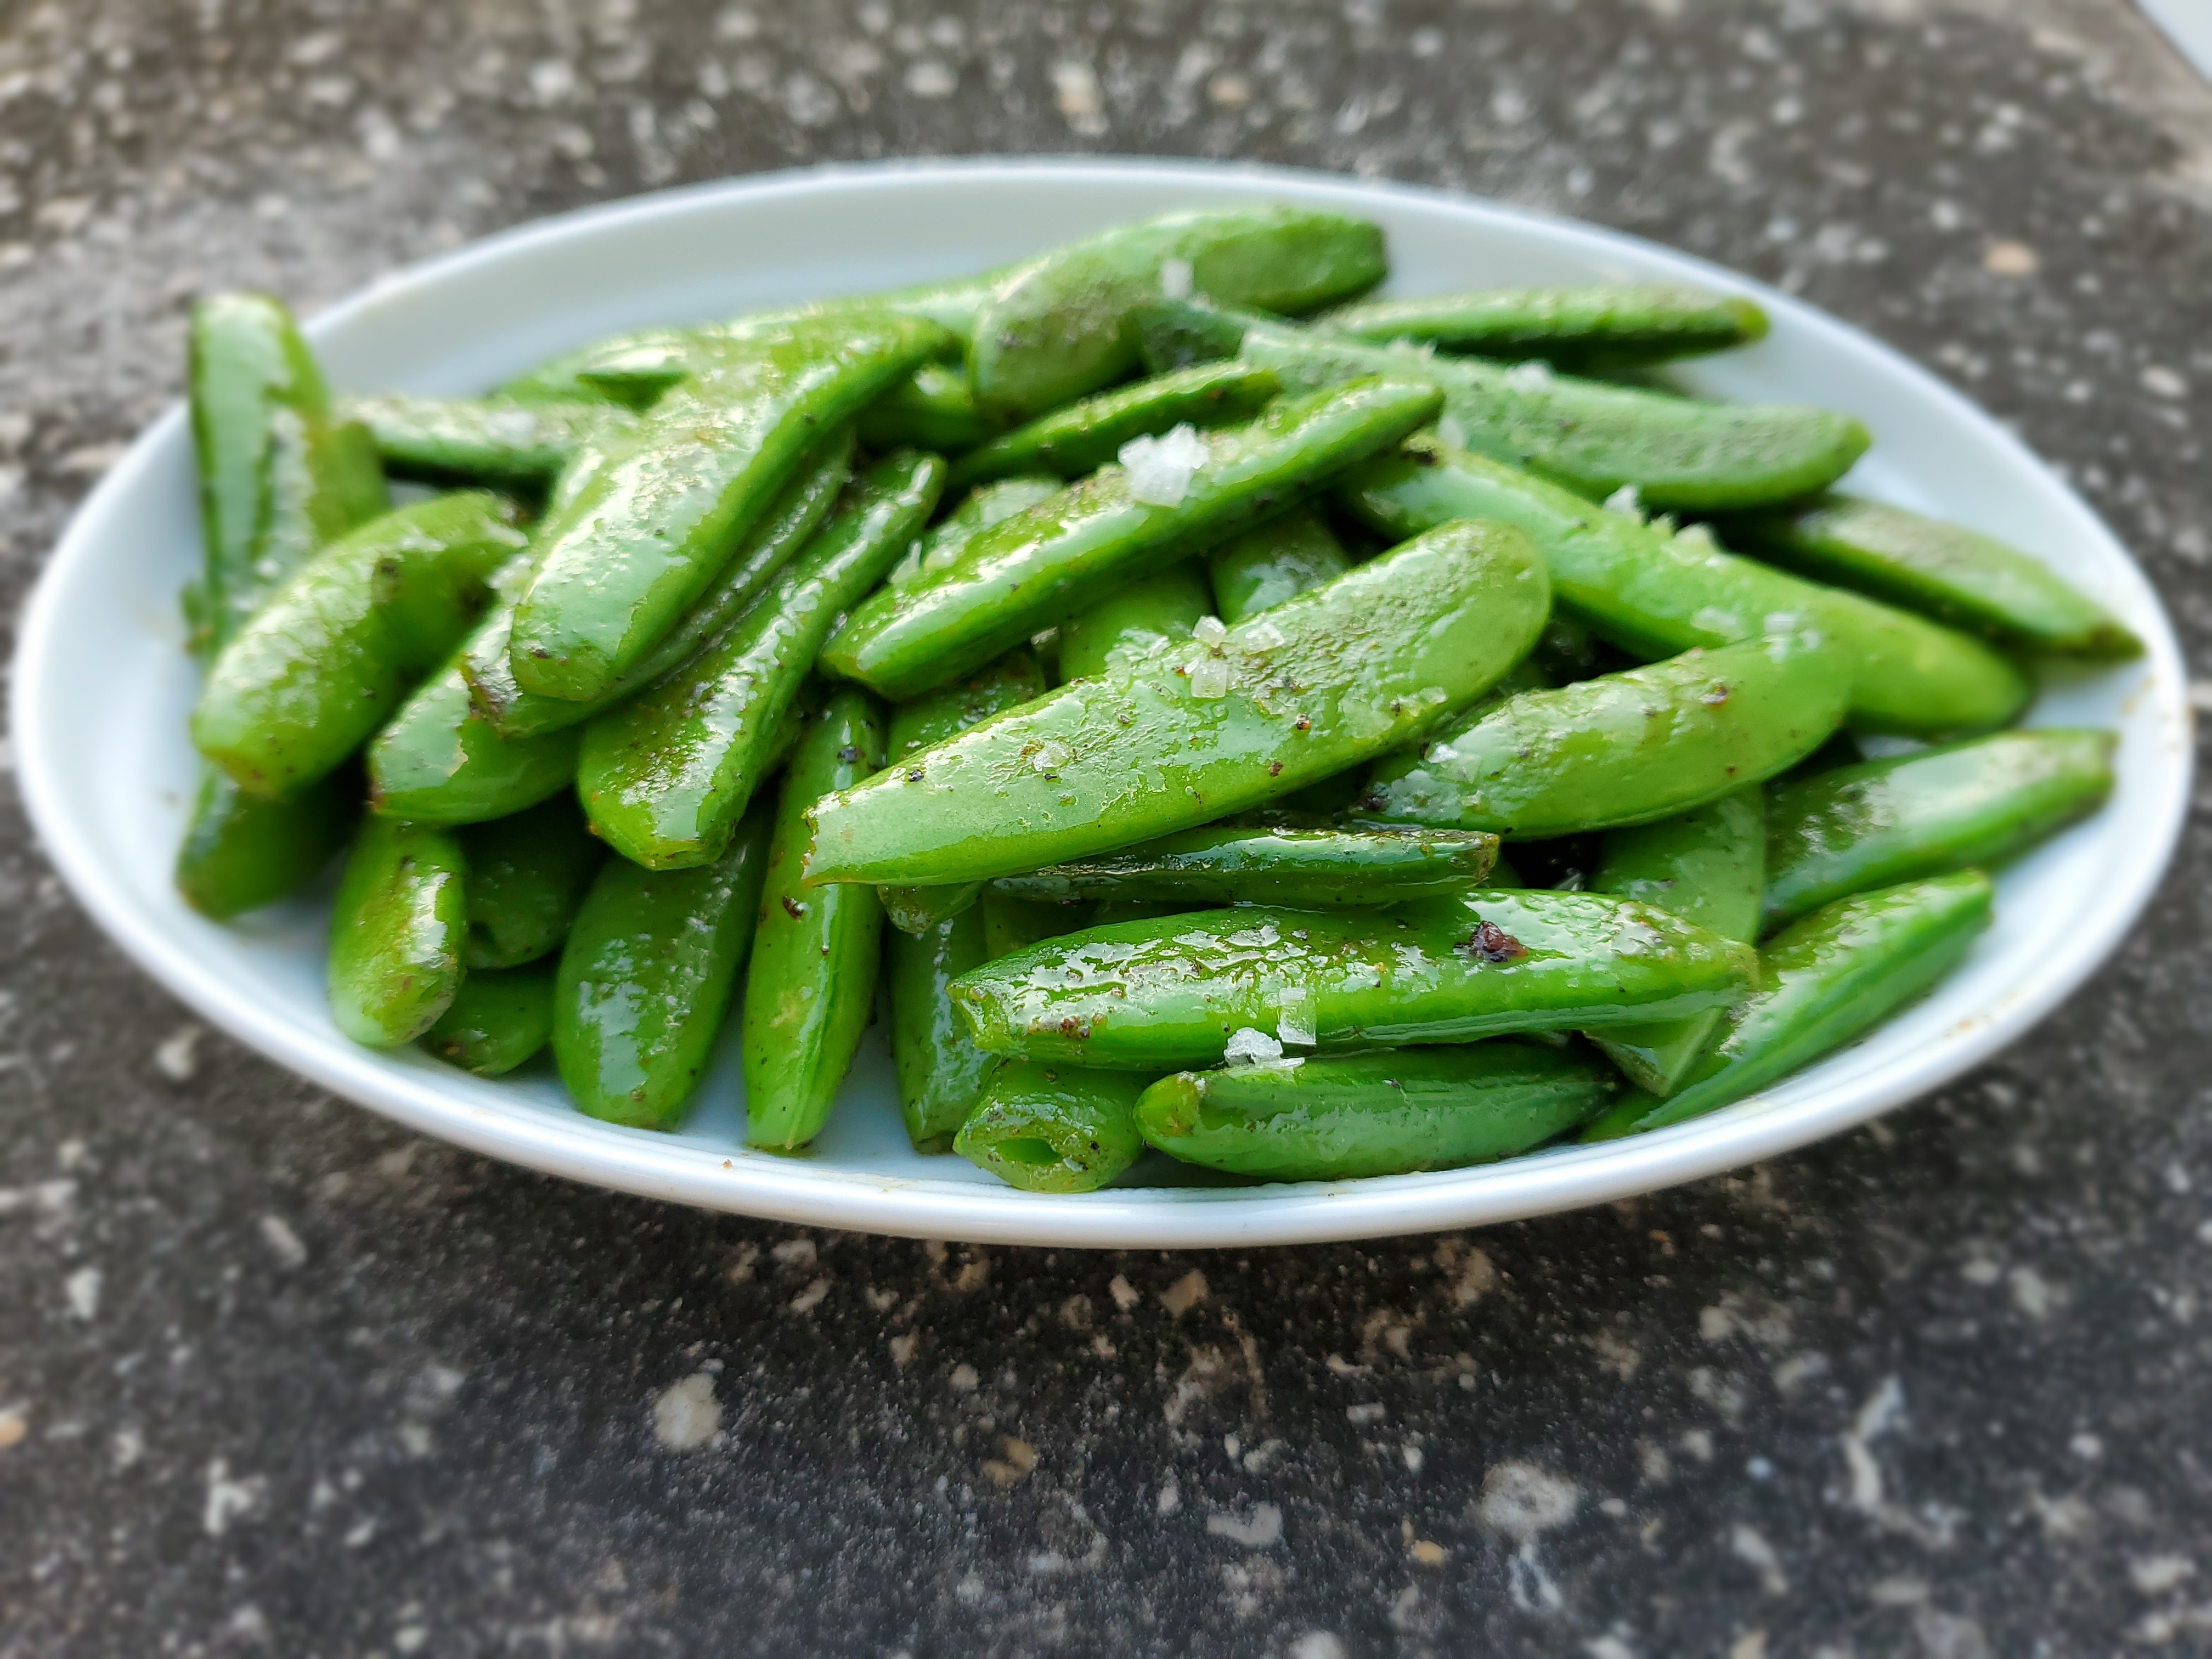 Close-up picture of a plate of sugar snap peas